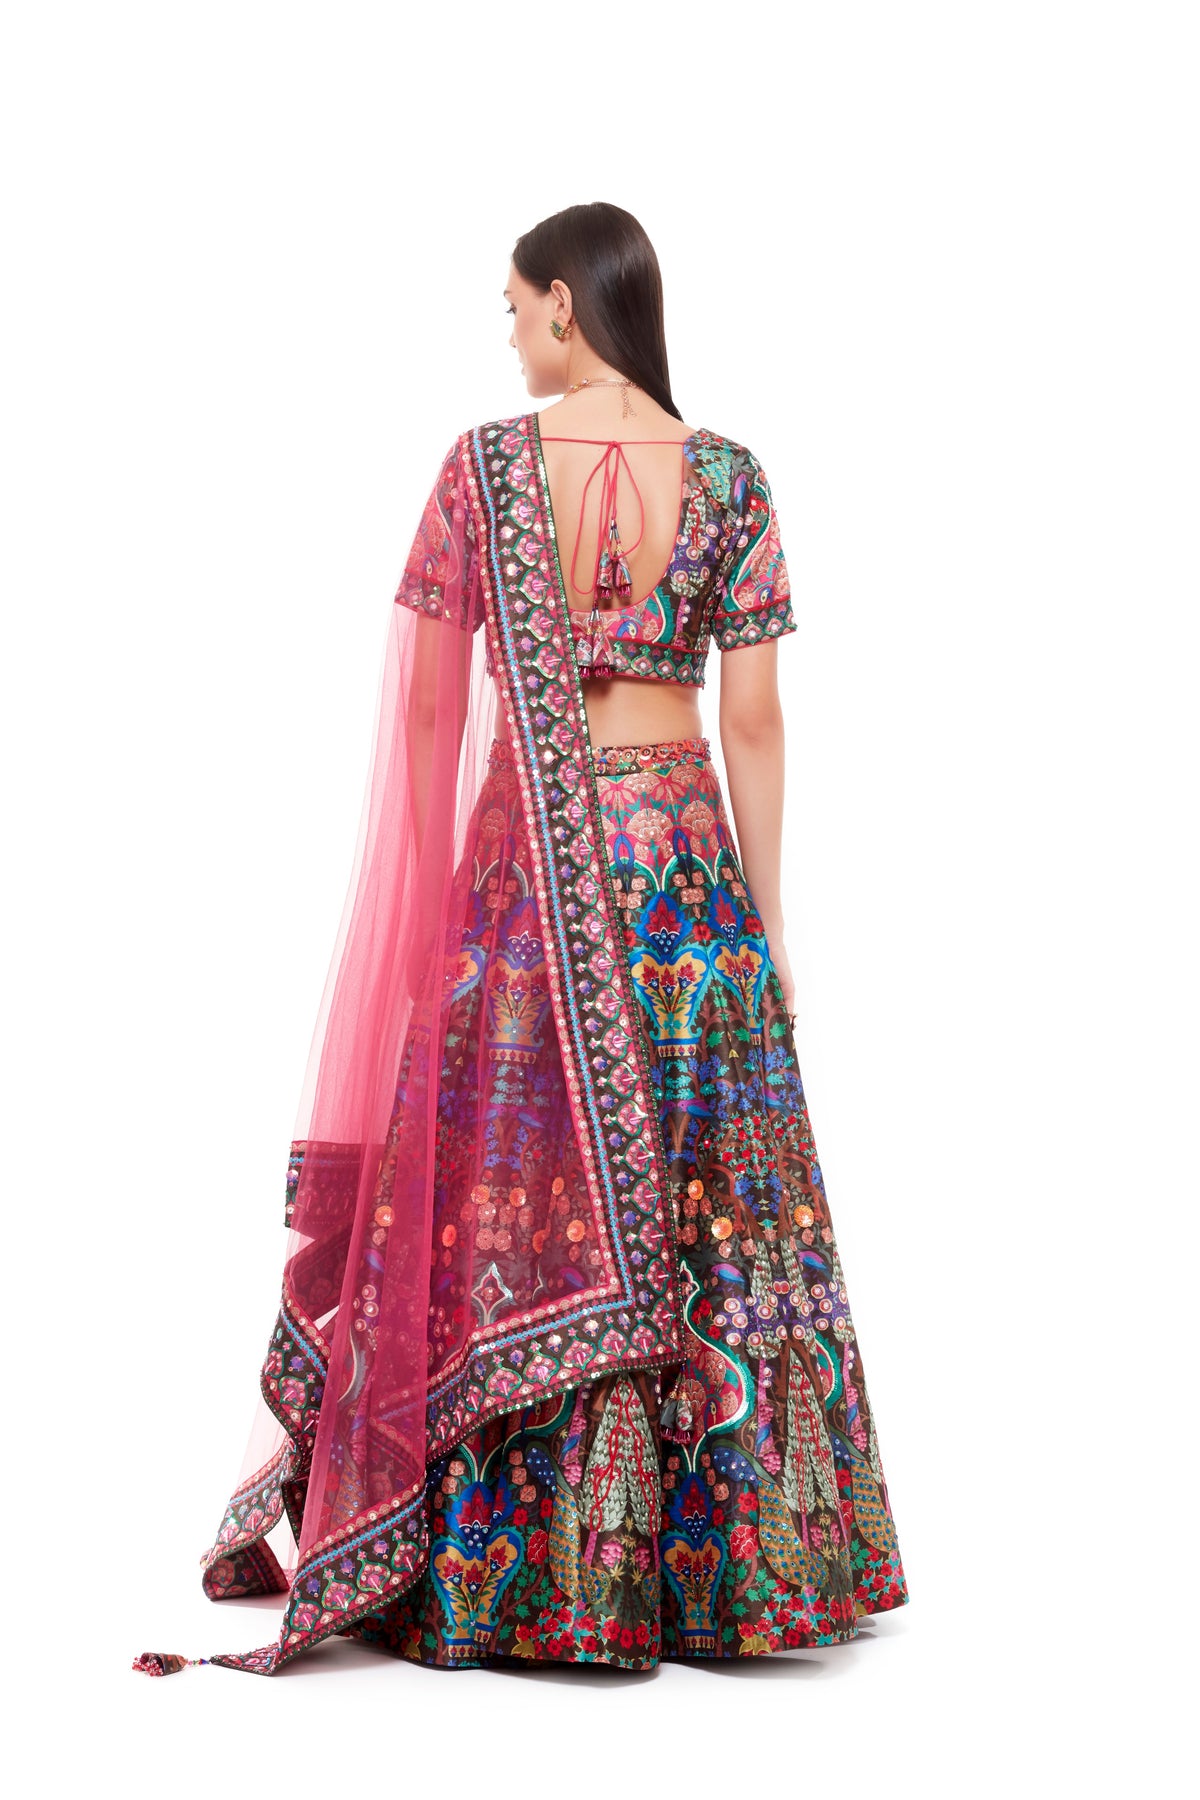 Buy online Pink Cotton Blend Printed Blouse from ethnic wear for